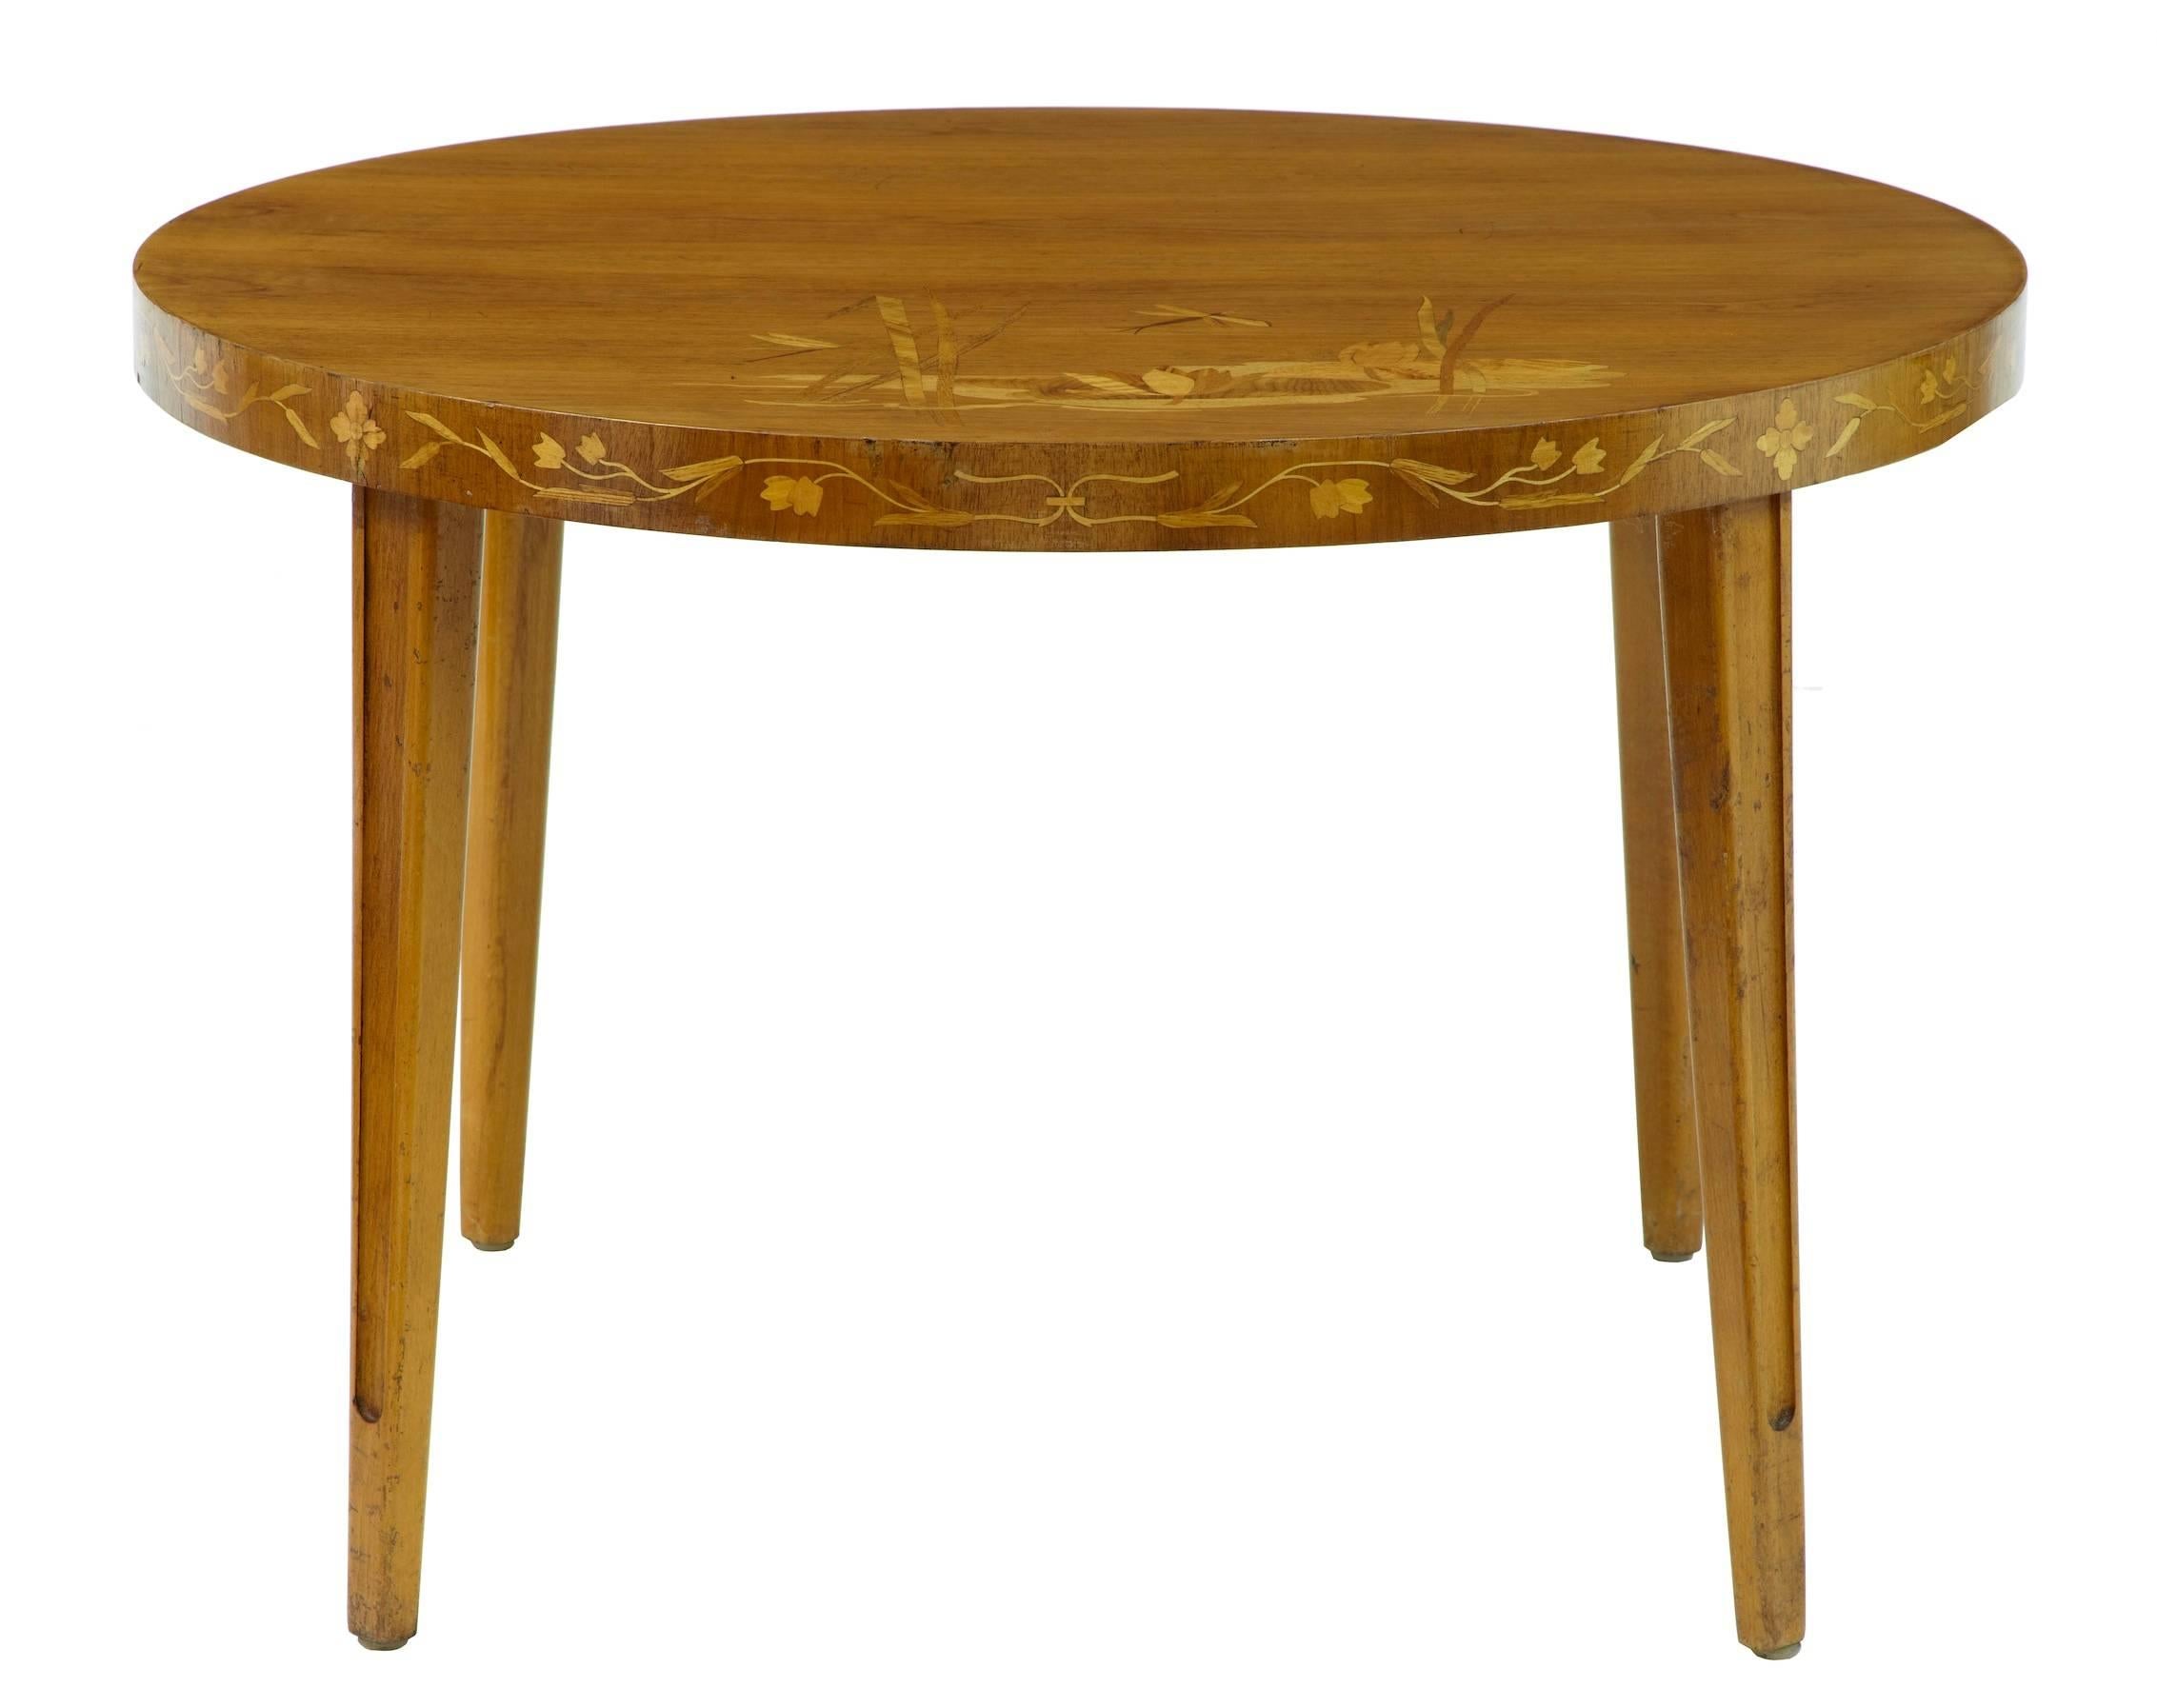 Swedish birch inlaid occasional table, circa 1950.
Inlaid in the oriental style with lilies and dragonfly
some minor marks to veneer.
Measures:
Height 23 1/2